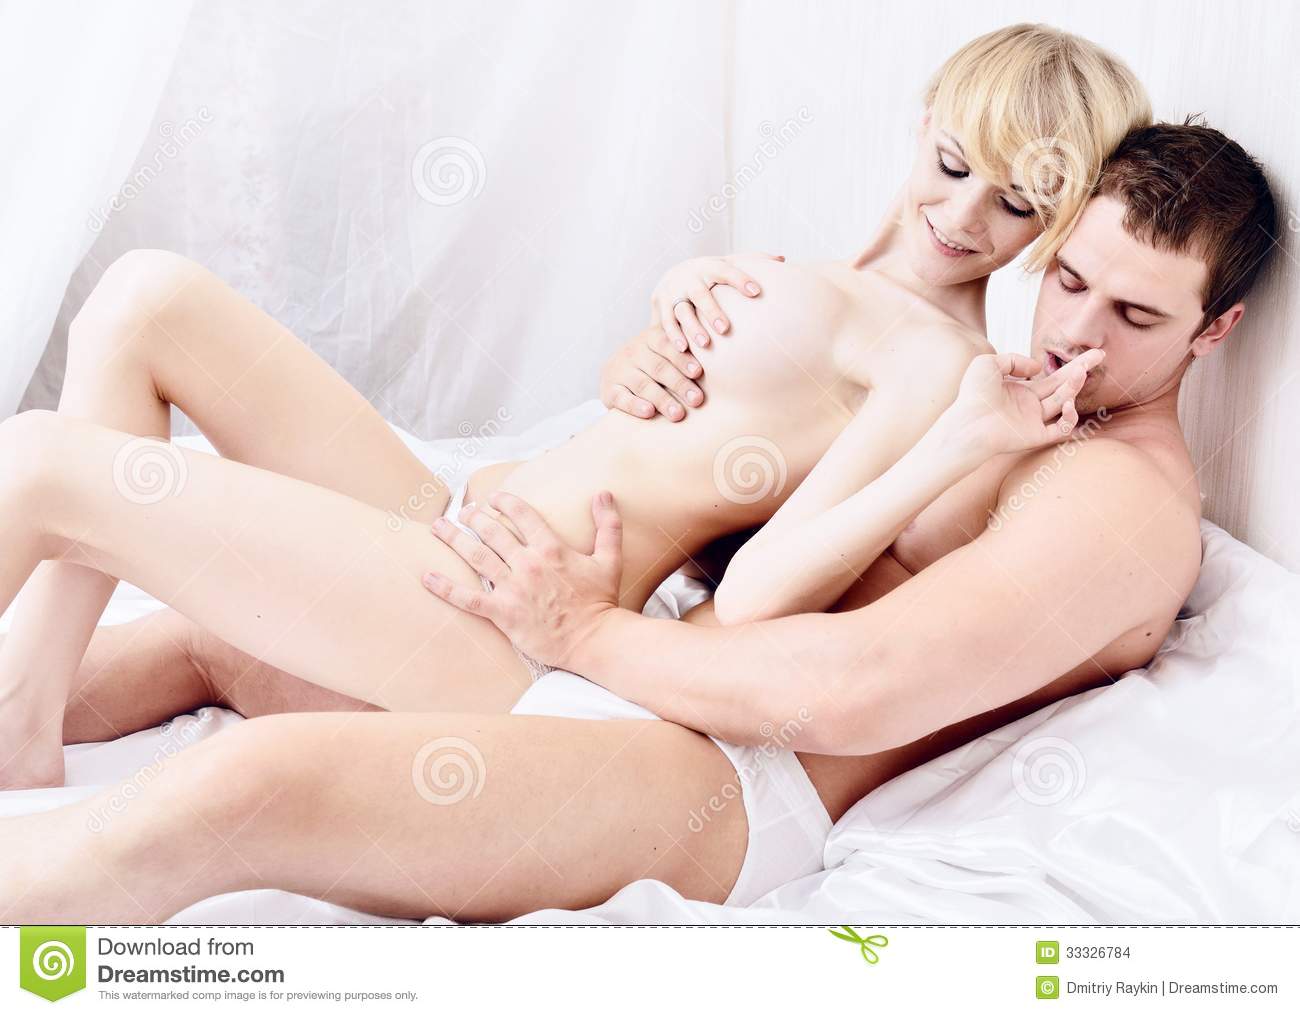 Nude couples in bedrooms together